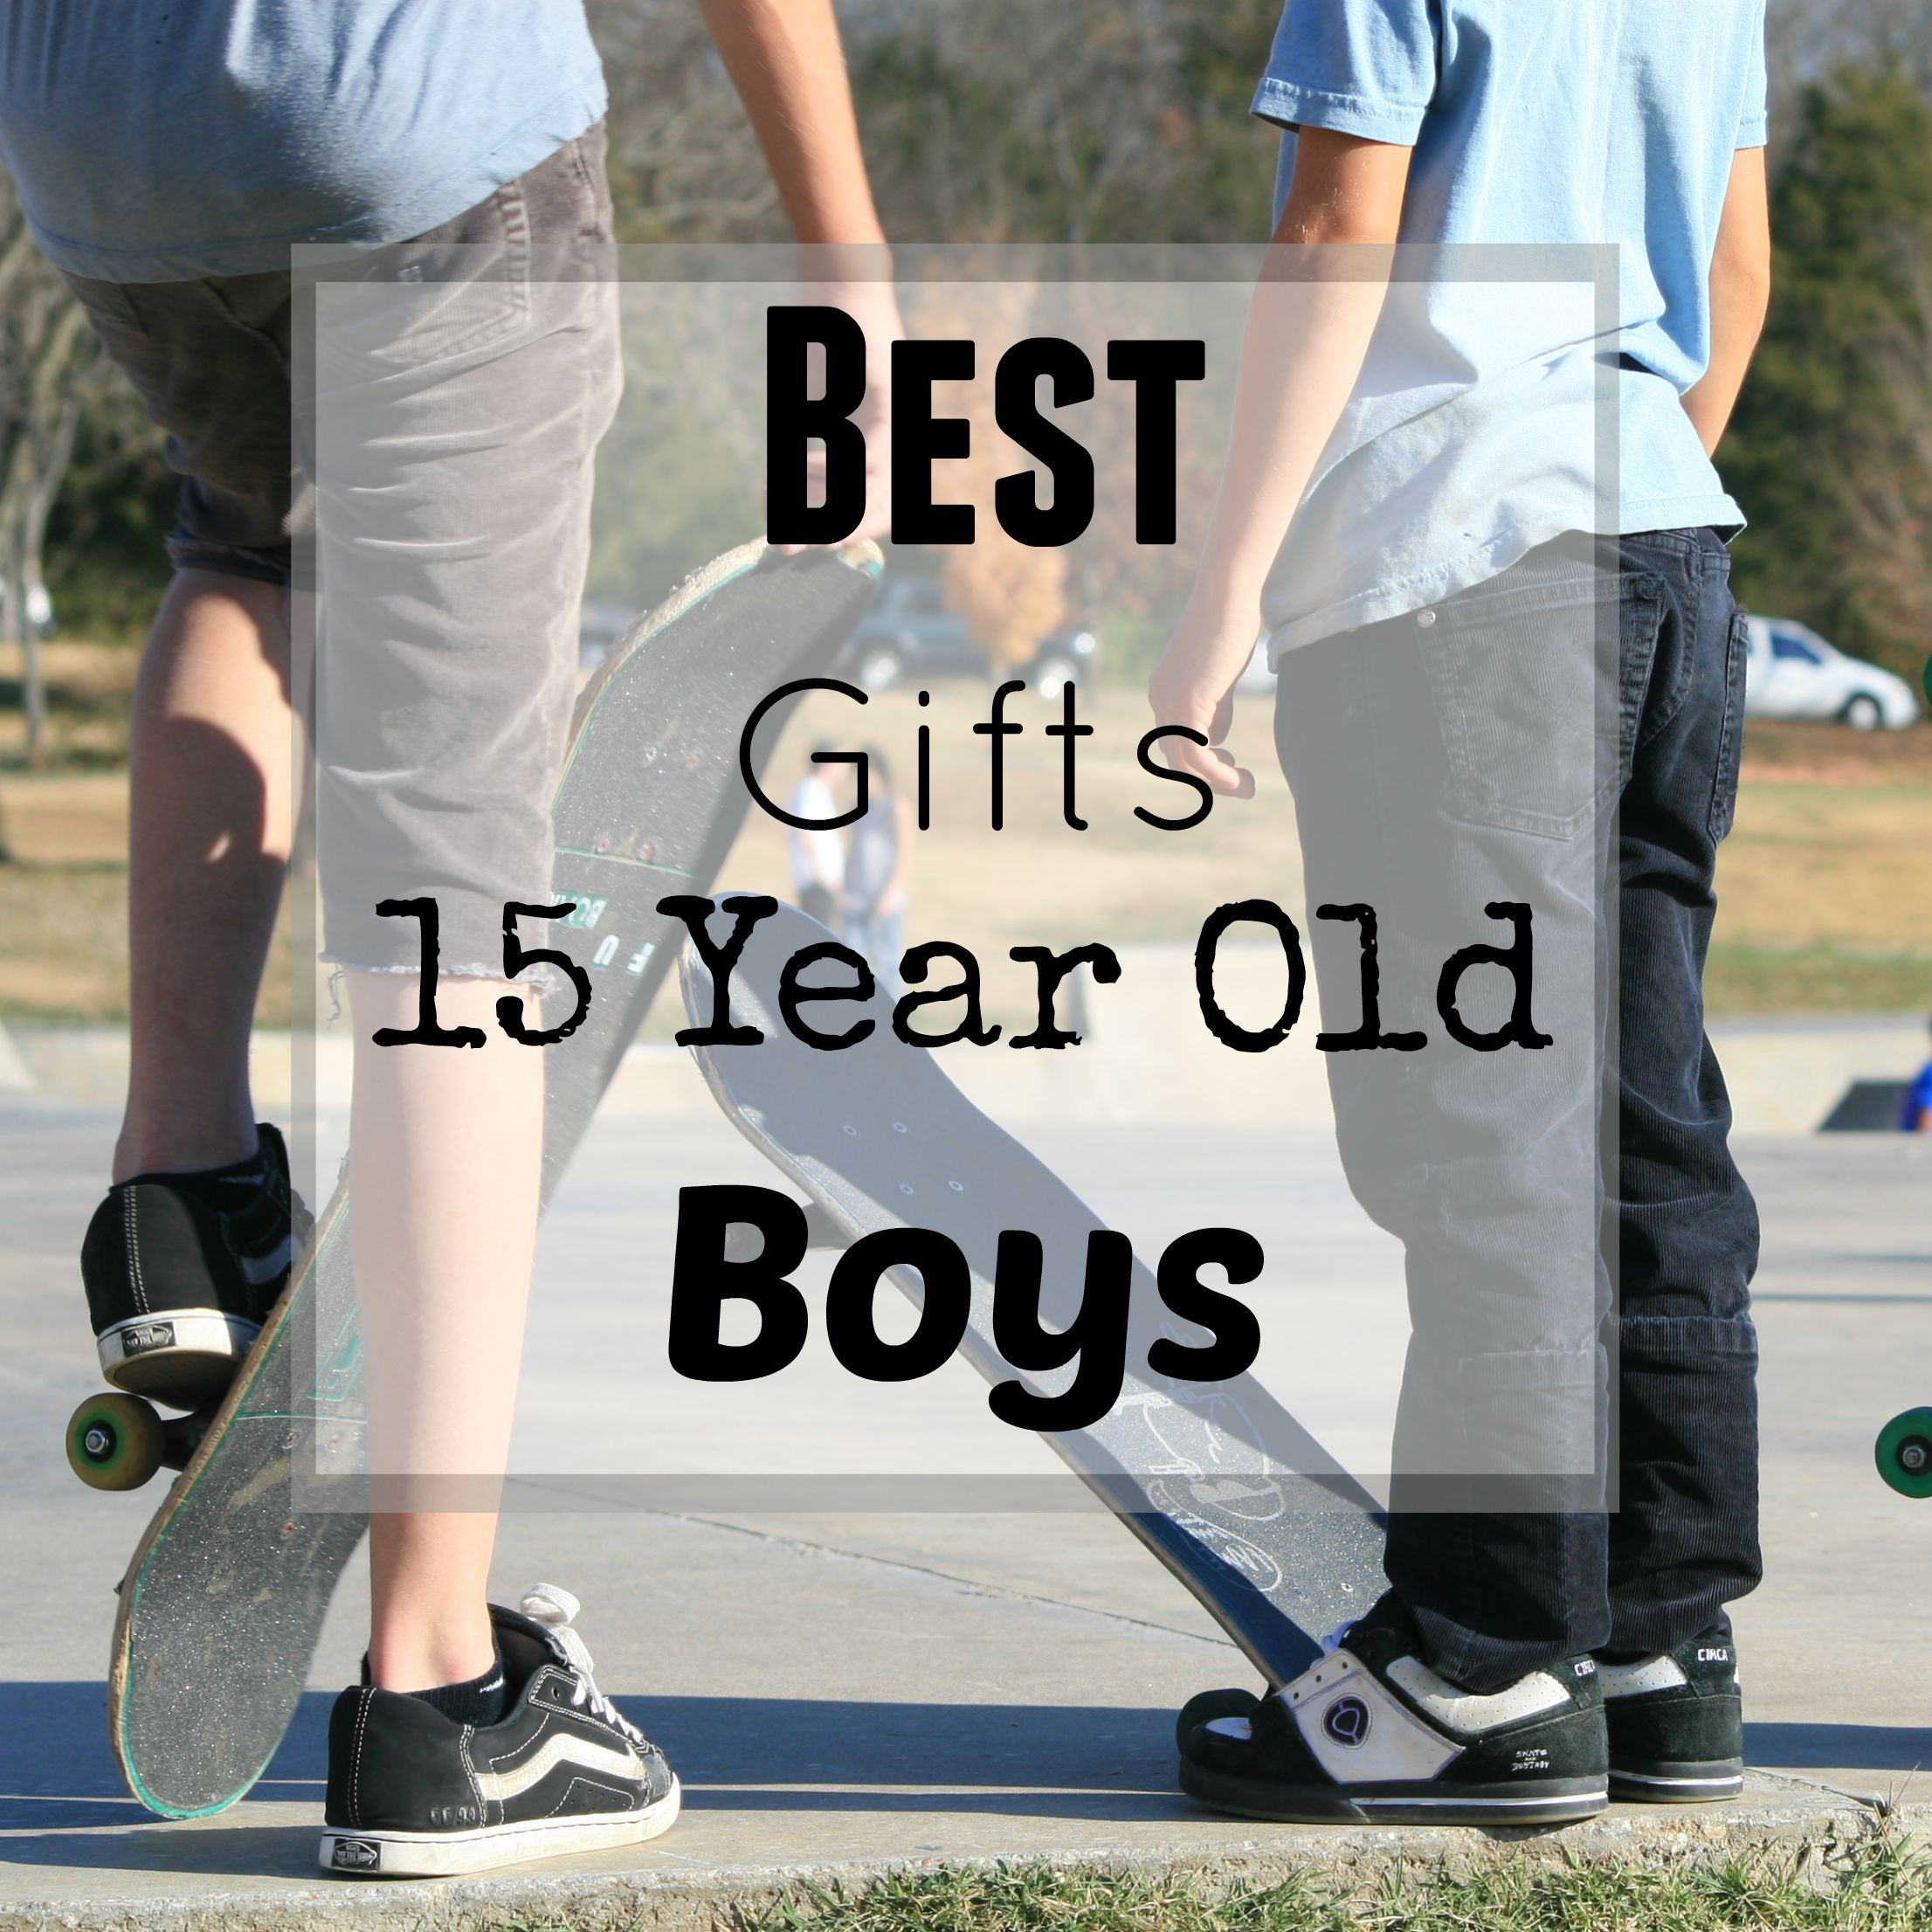 Christmas Gift Ideas For 15 Year Old Boy
 Pin on Best Gifts for Teen Boys